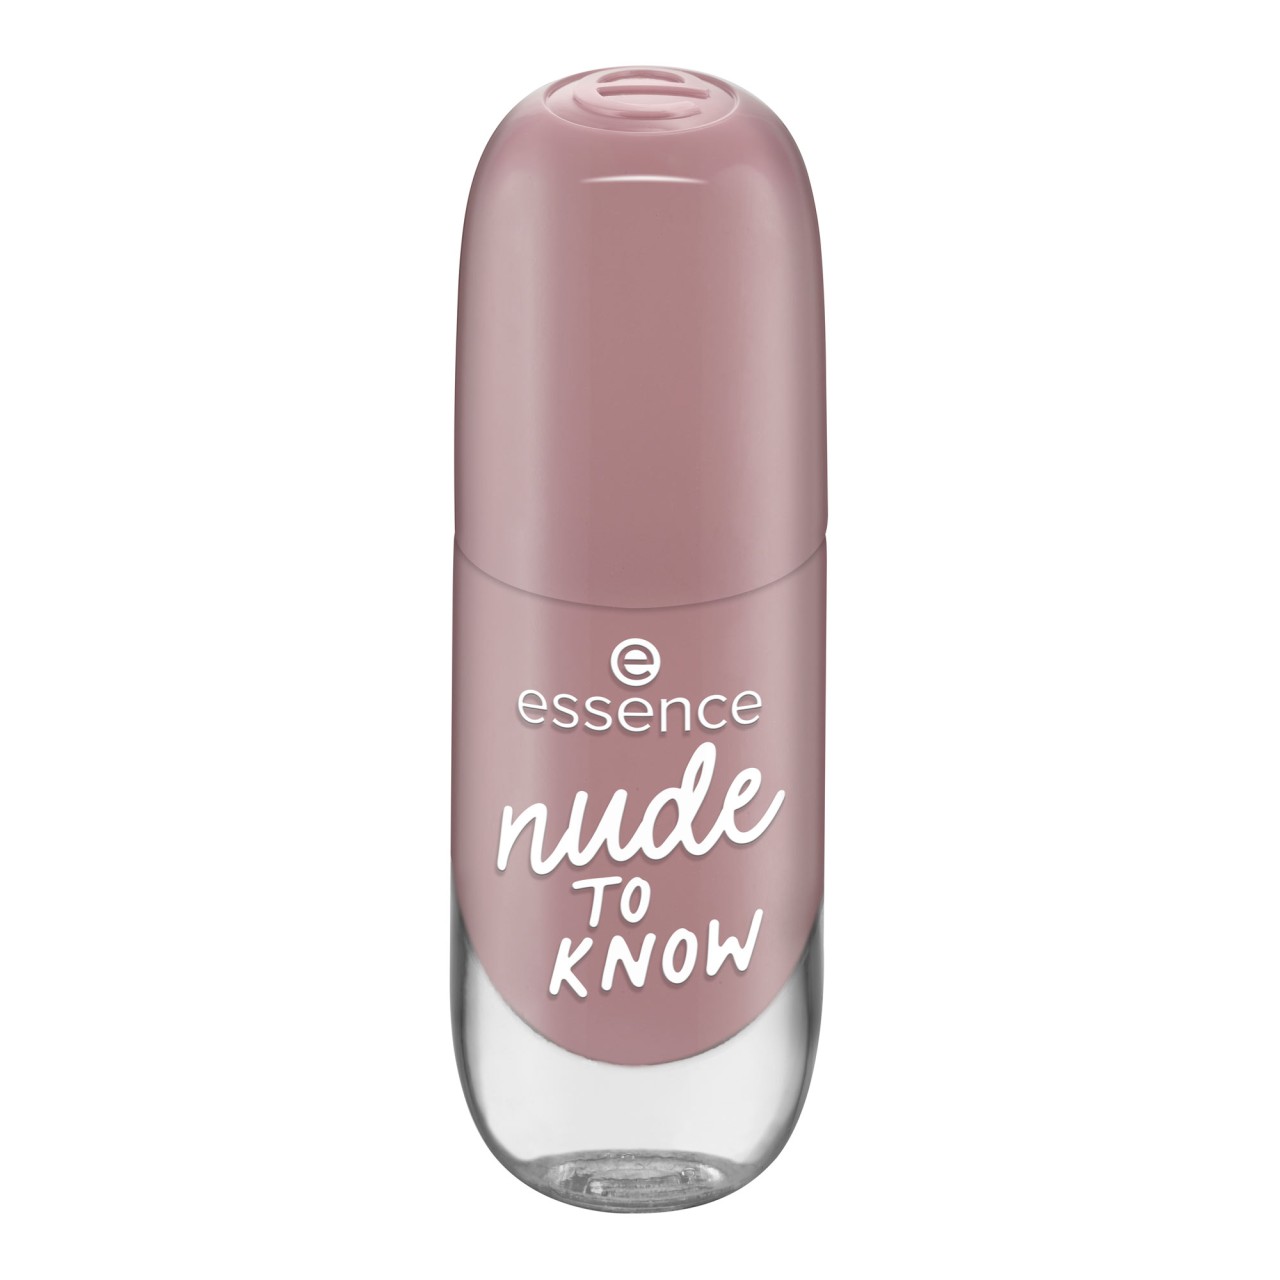 ESSENCE - GelNail Colour -  Nude To Know